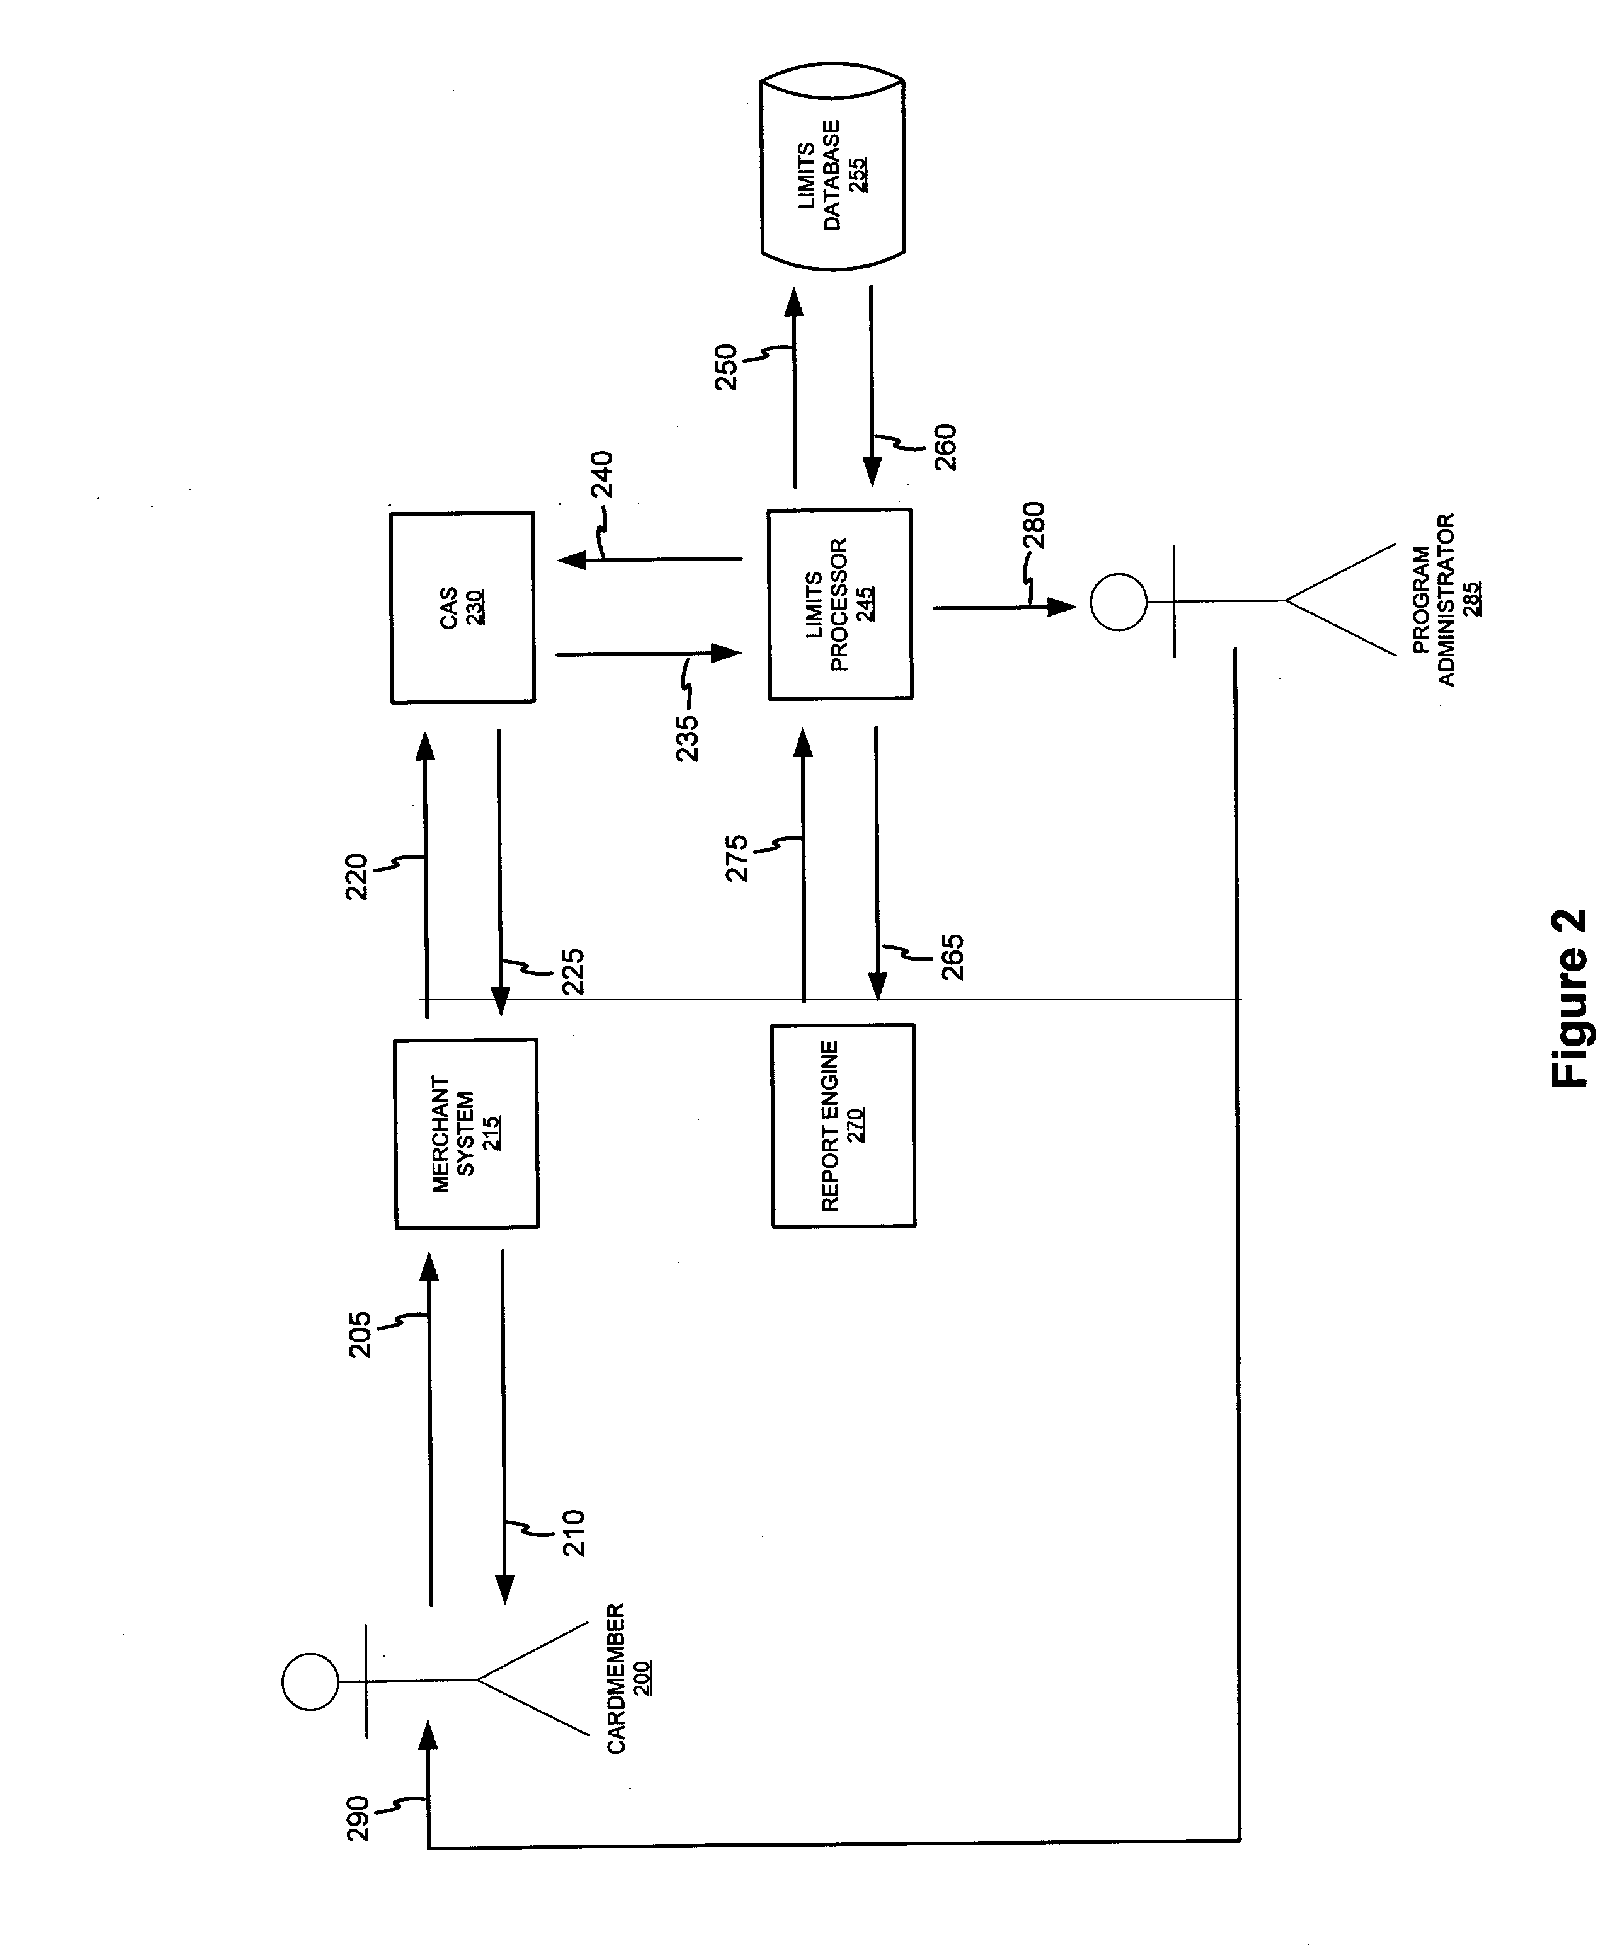 System and method for calculating recommended charge limits